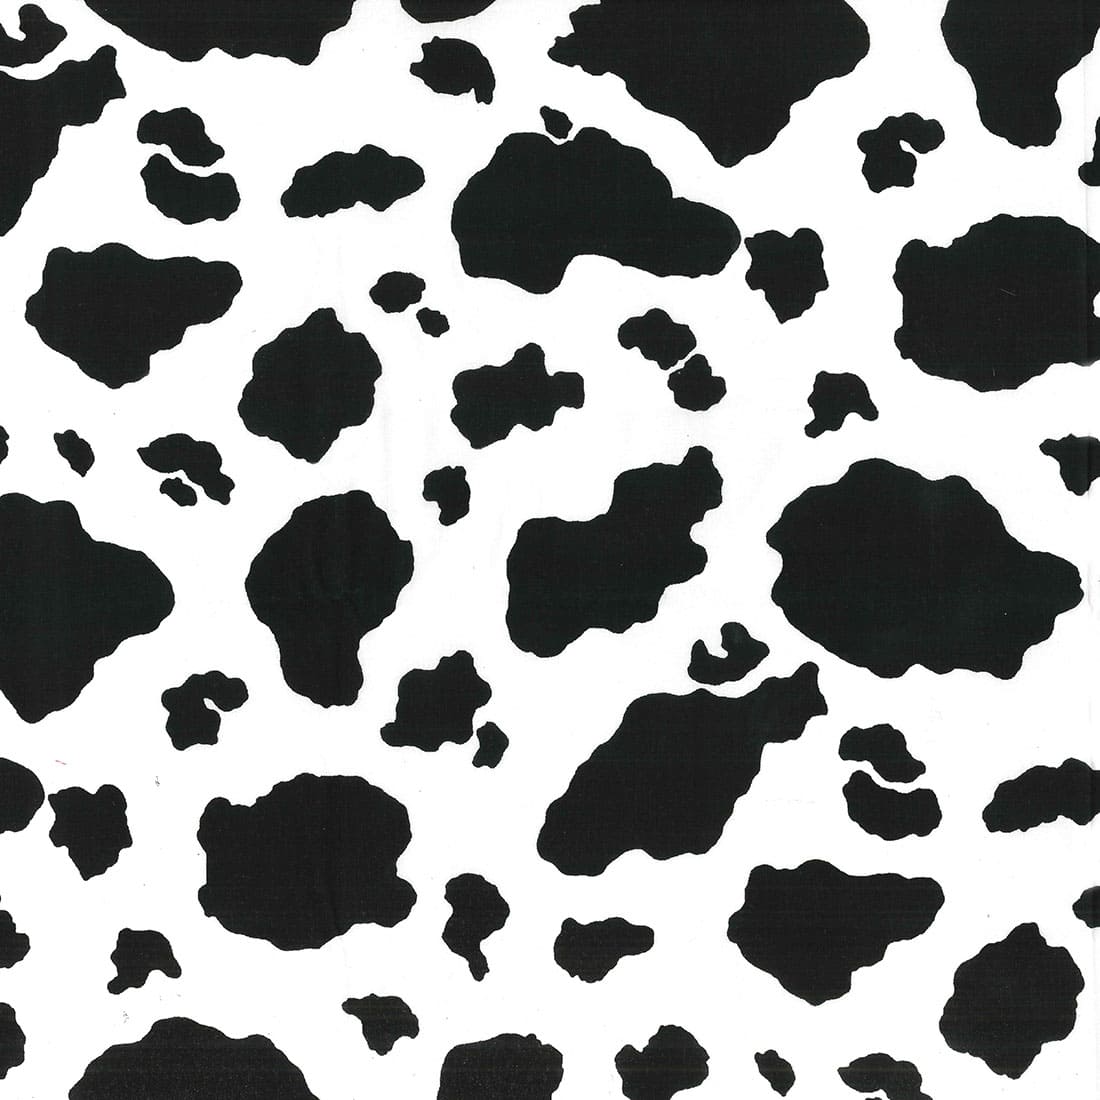 Fabric Traditions Cow Print Cotton Fabric